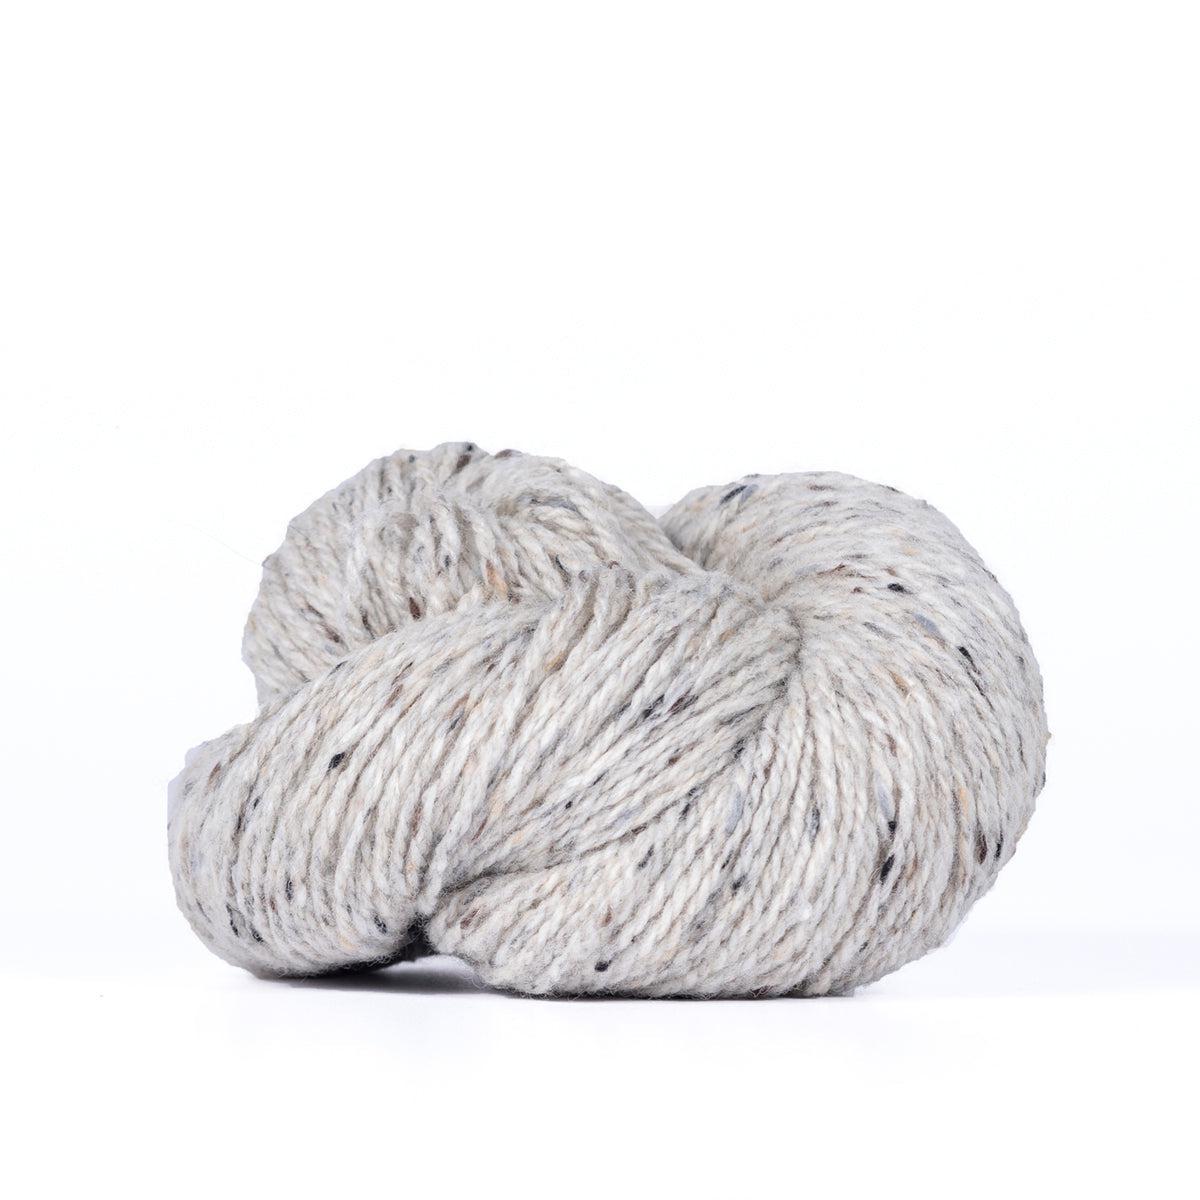 A skein of Kelbourne Woolens Lucky Tweed Light Grey, a light grey with darker brown and grey flecks.